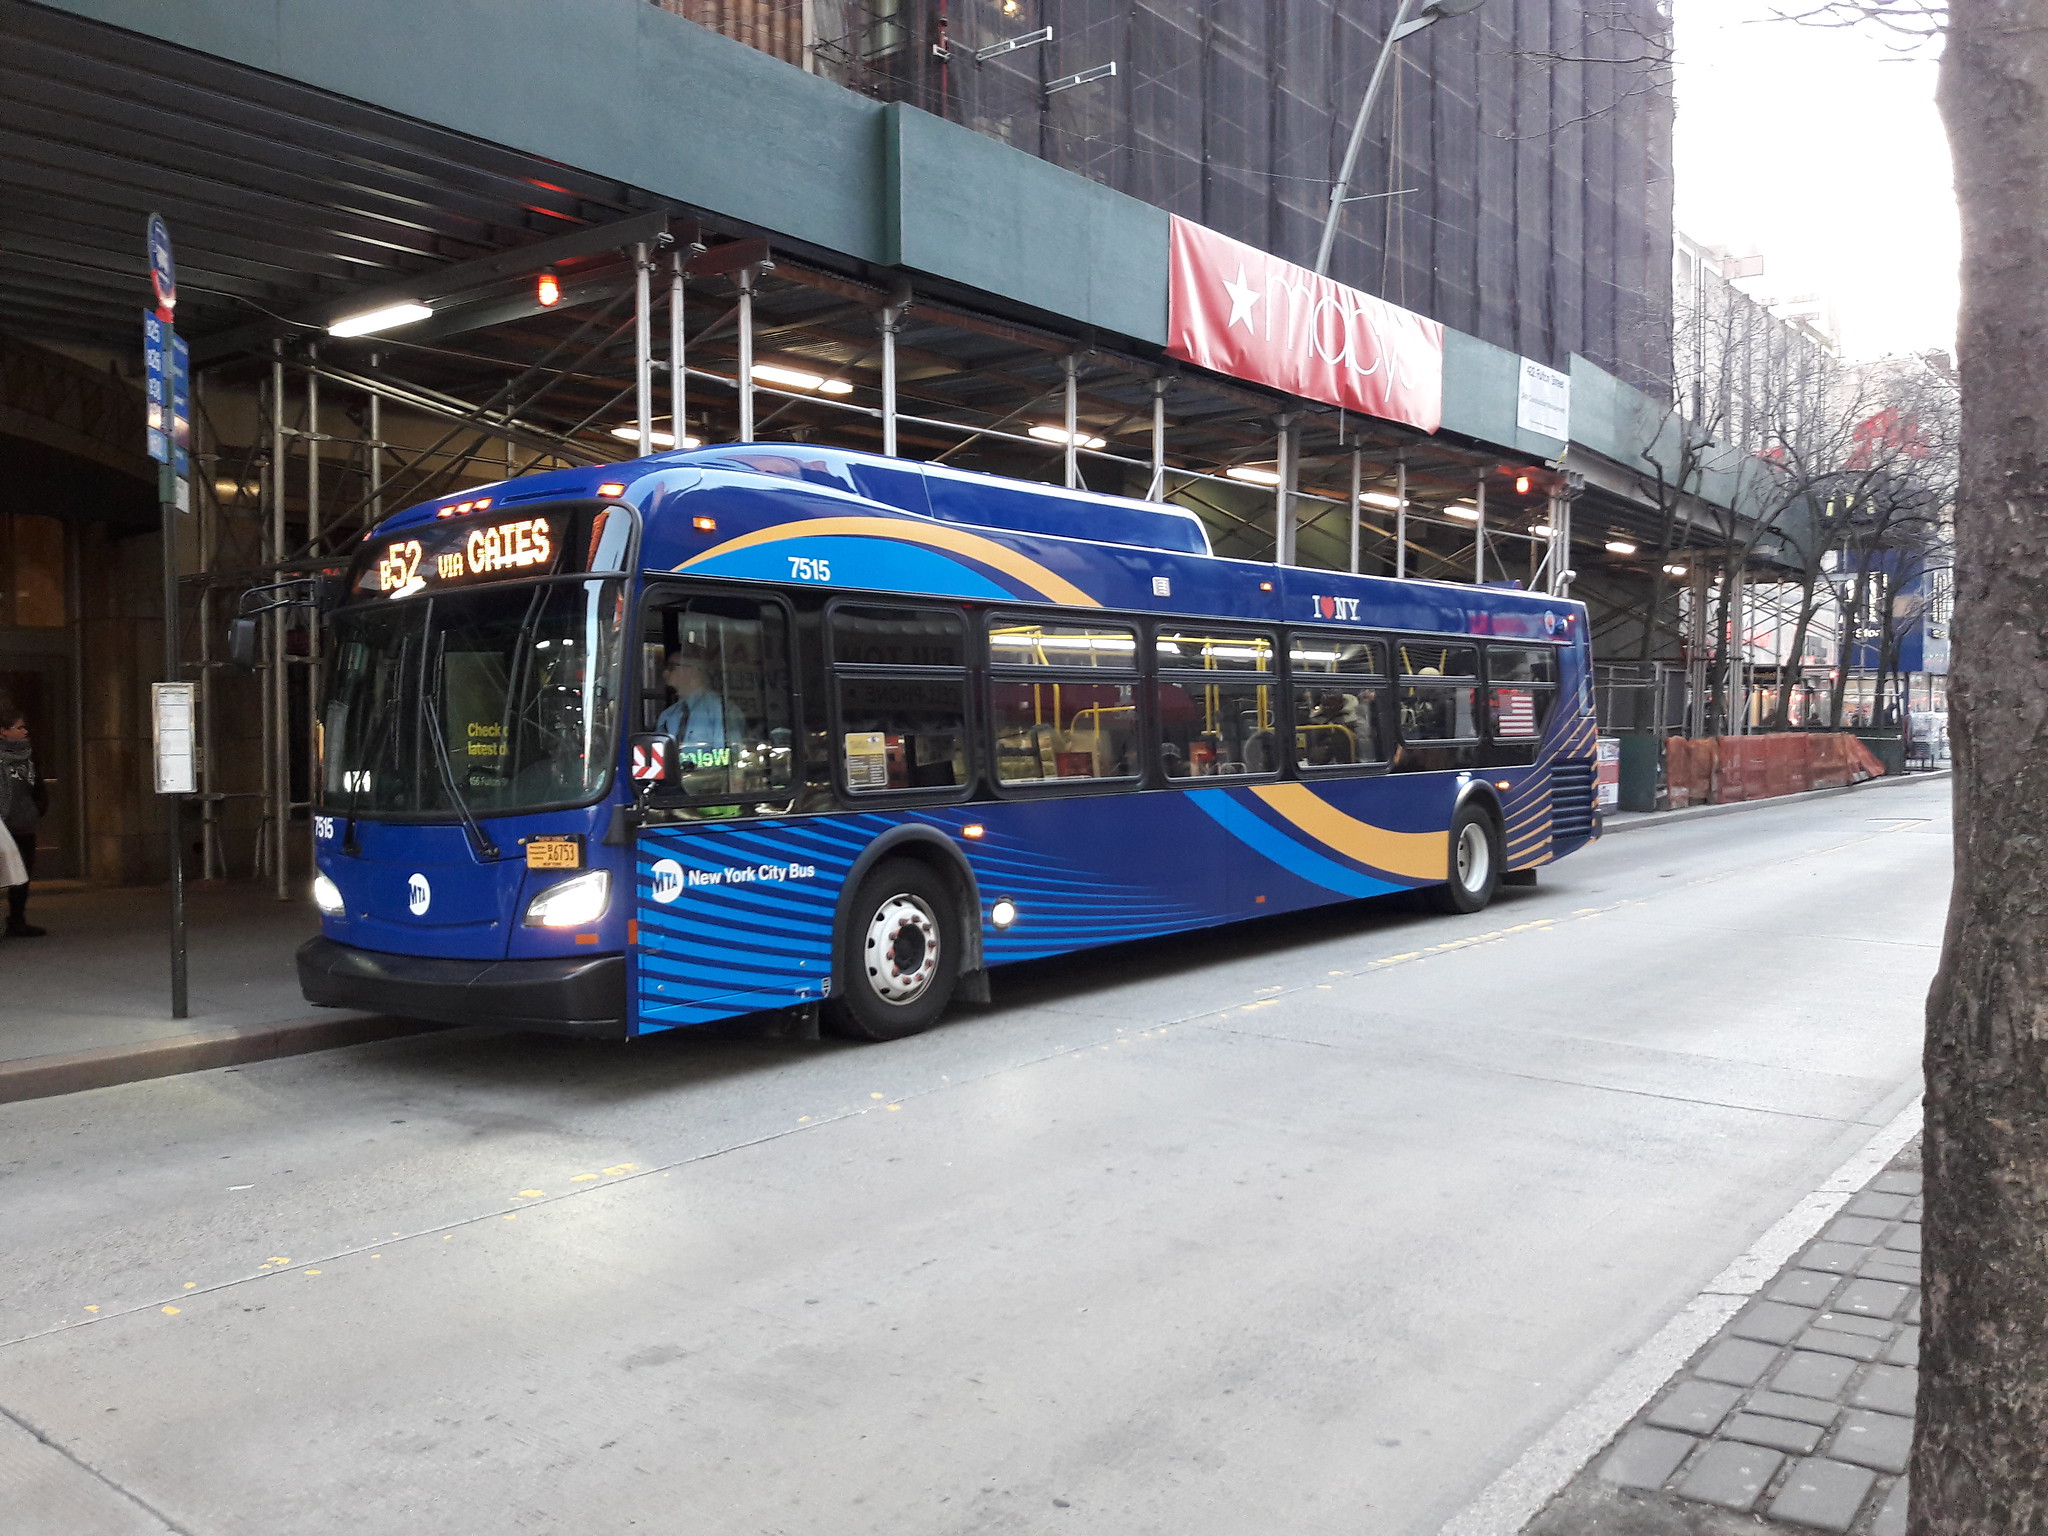 March 3rd on Fox Bus - Bus Photos & Videos - NYC Transit Forums